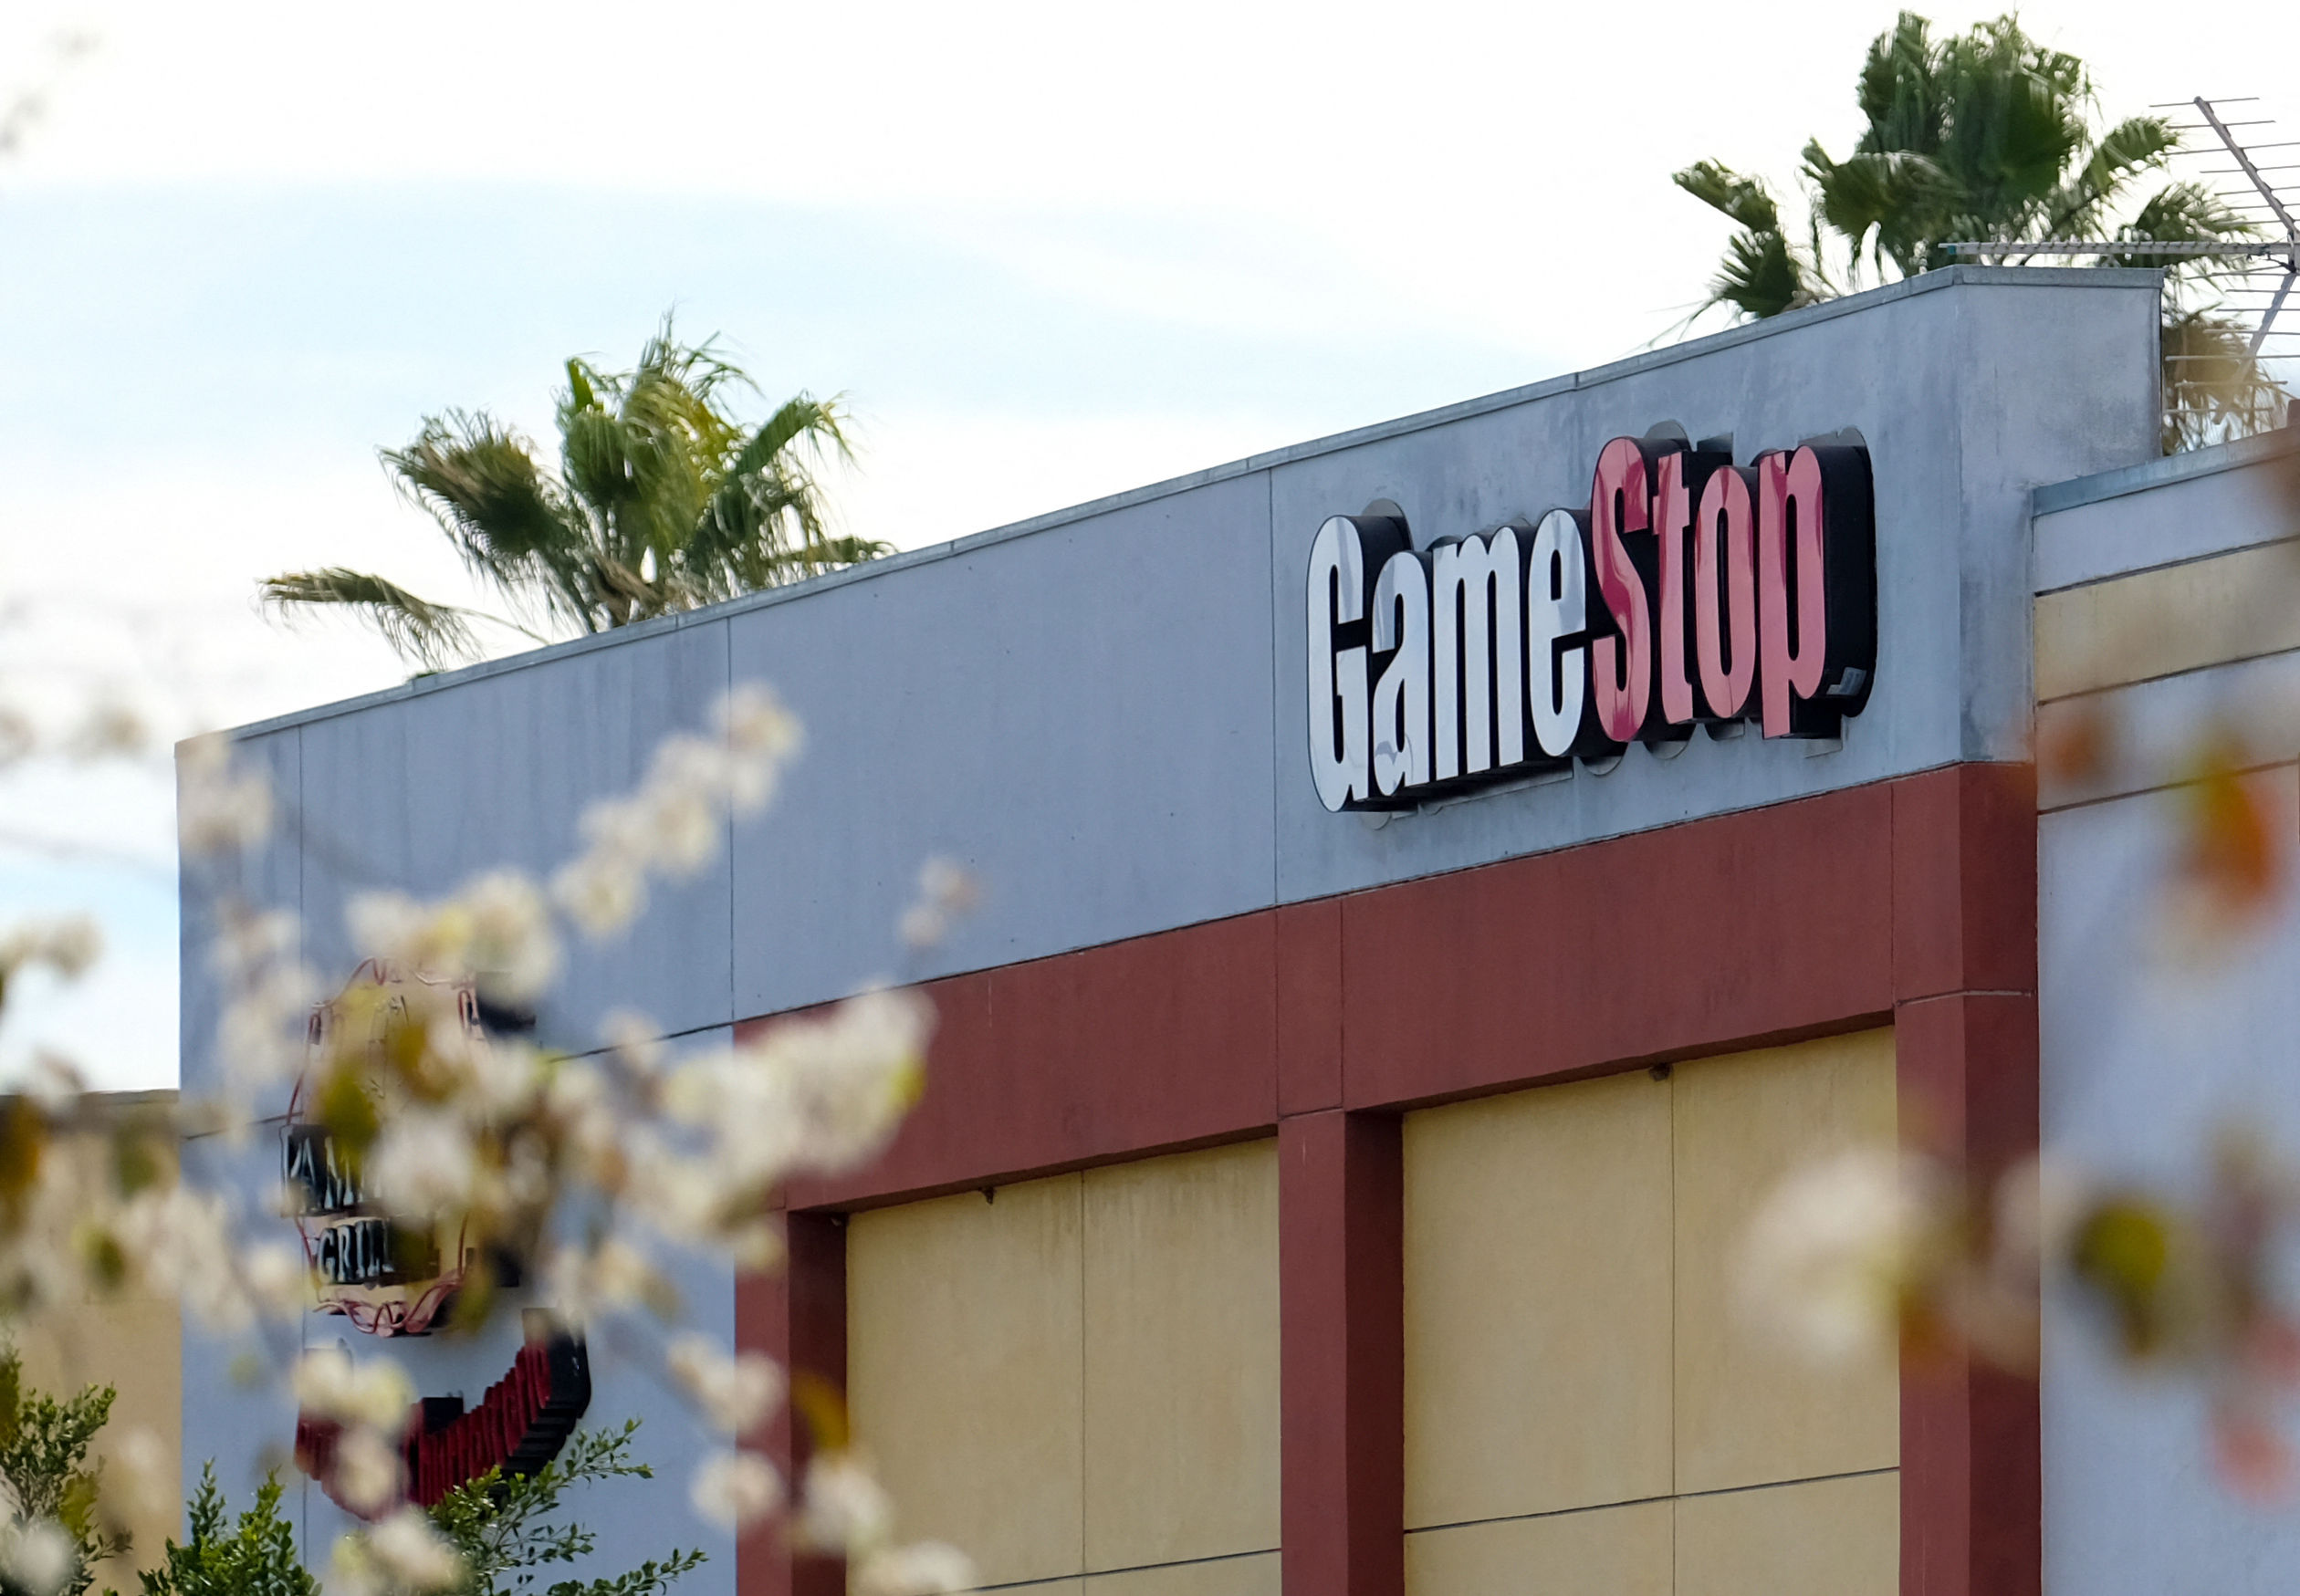 GameStop%2C%20RME%20and%20UWMC%3A%20Stocks%20that%20are%20dominating%20conversations%20on%20Reddit%27s%20r/WallStreetBets